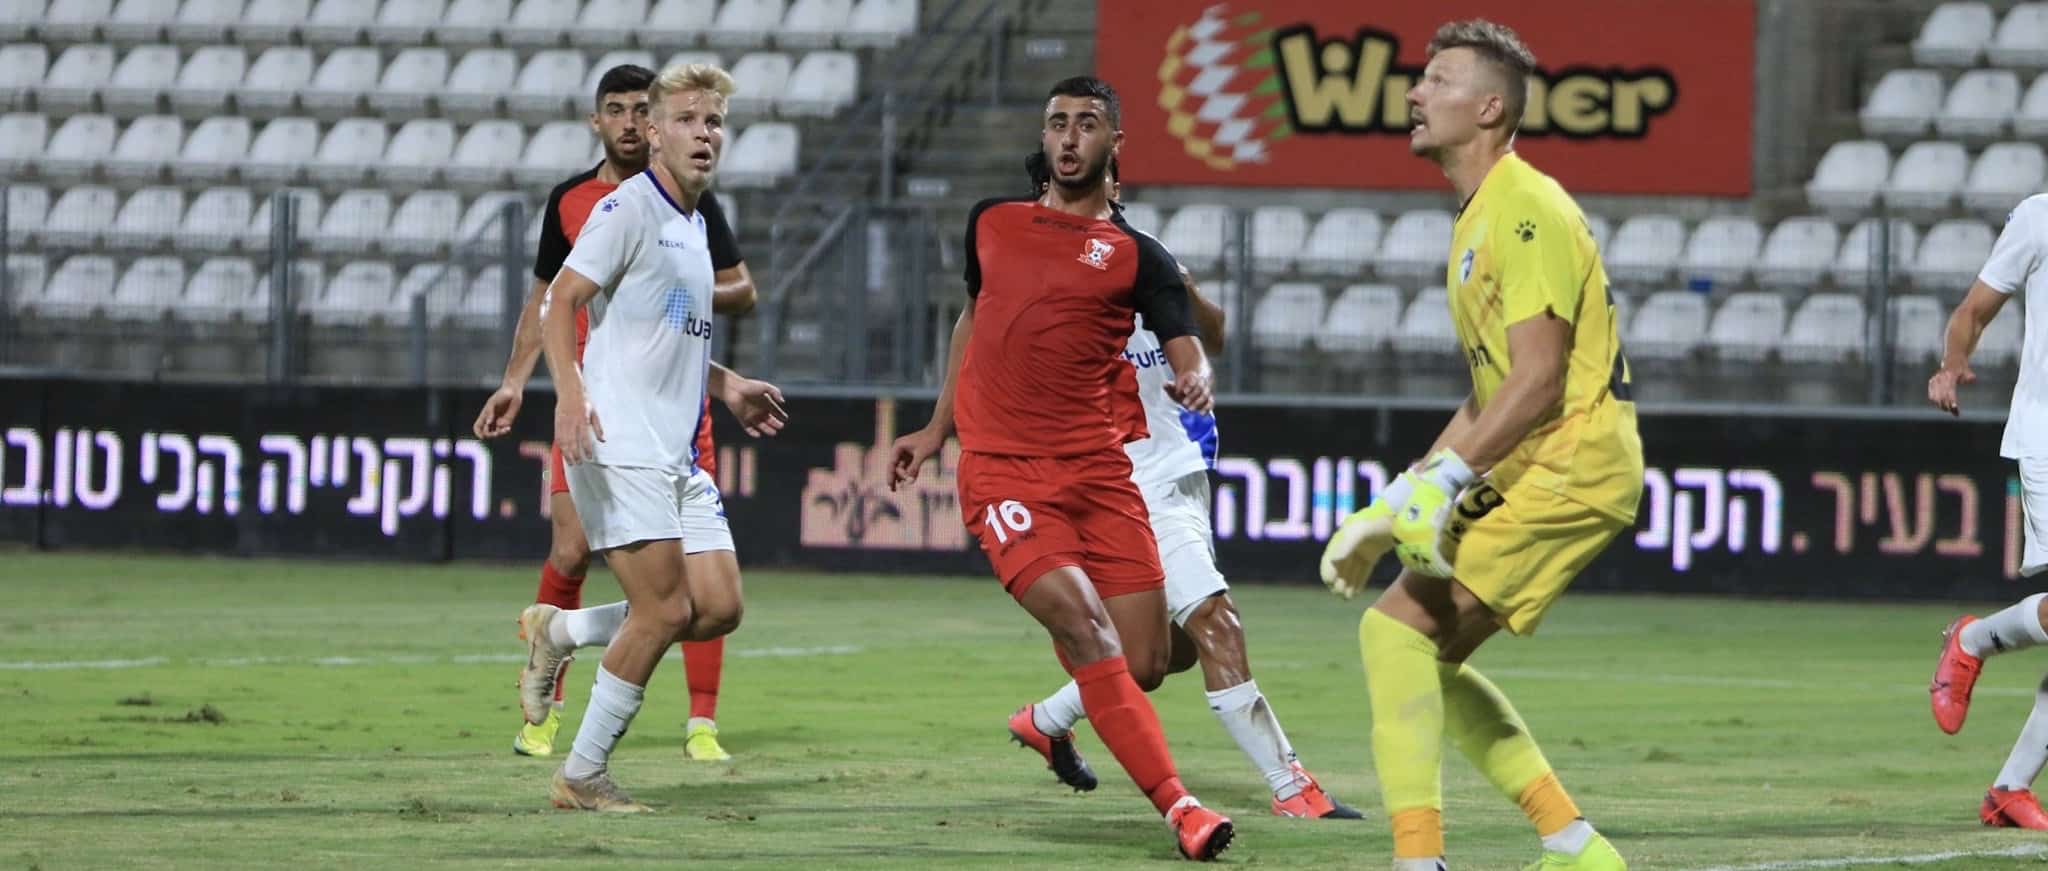 Sakhnin to play Maccabi TLV in Toto Cup Final, Jerusalem wins first game, Maccabi Haifa takes Derby – Toto Cup Round 3